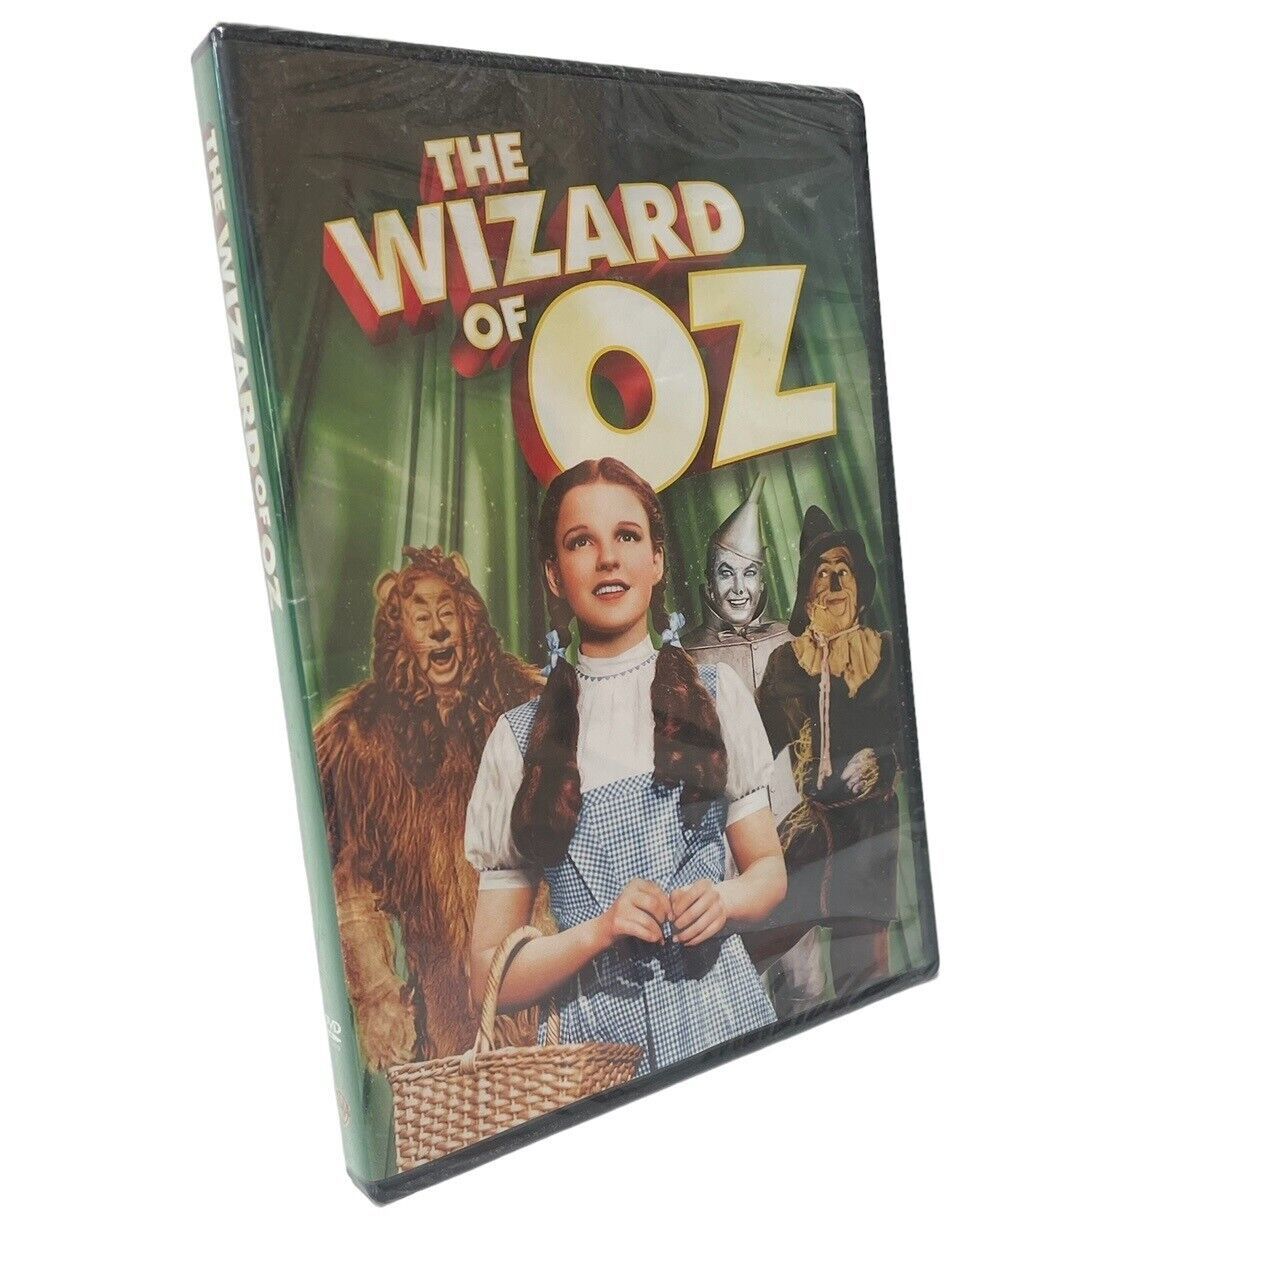 Primary image for The Wizard of Oz DVD Judy Garland 1939 Movie New Sealed 2013